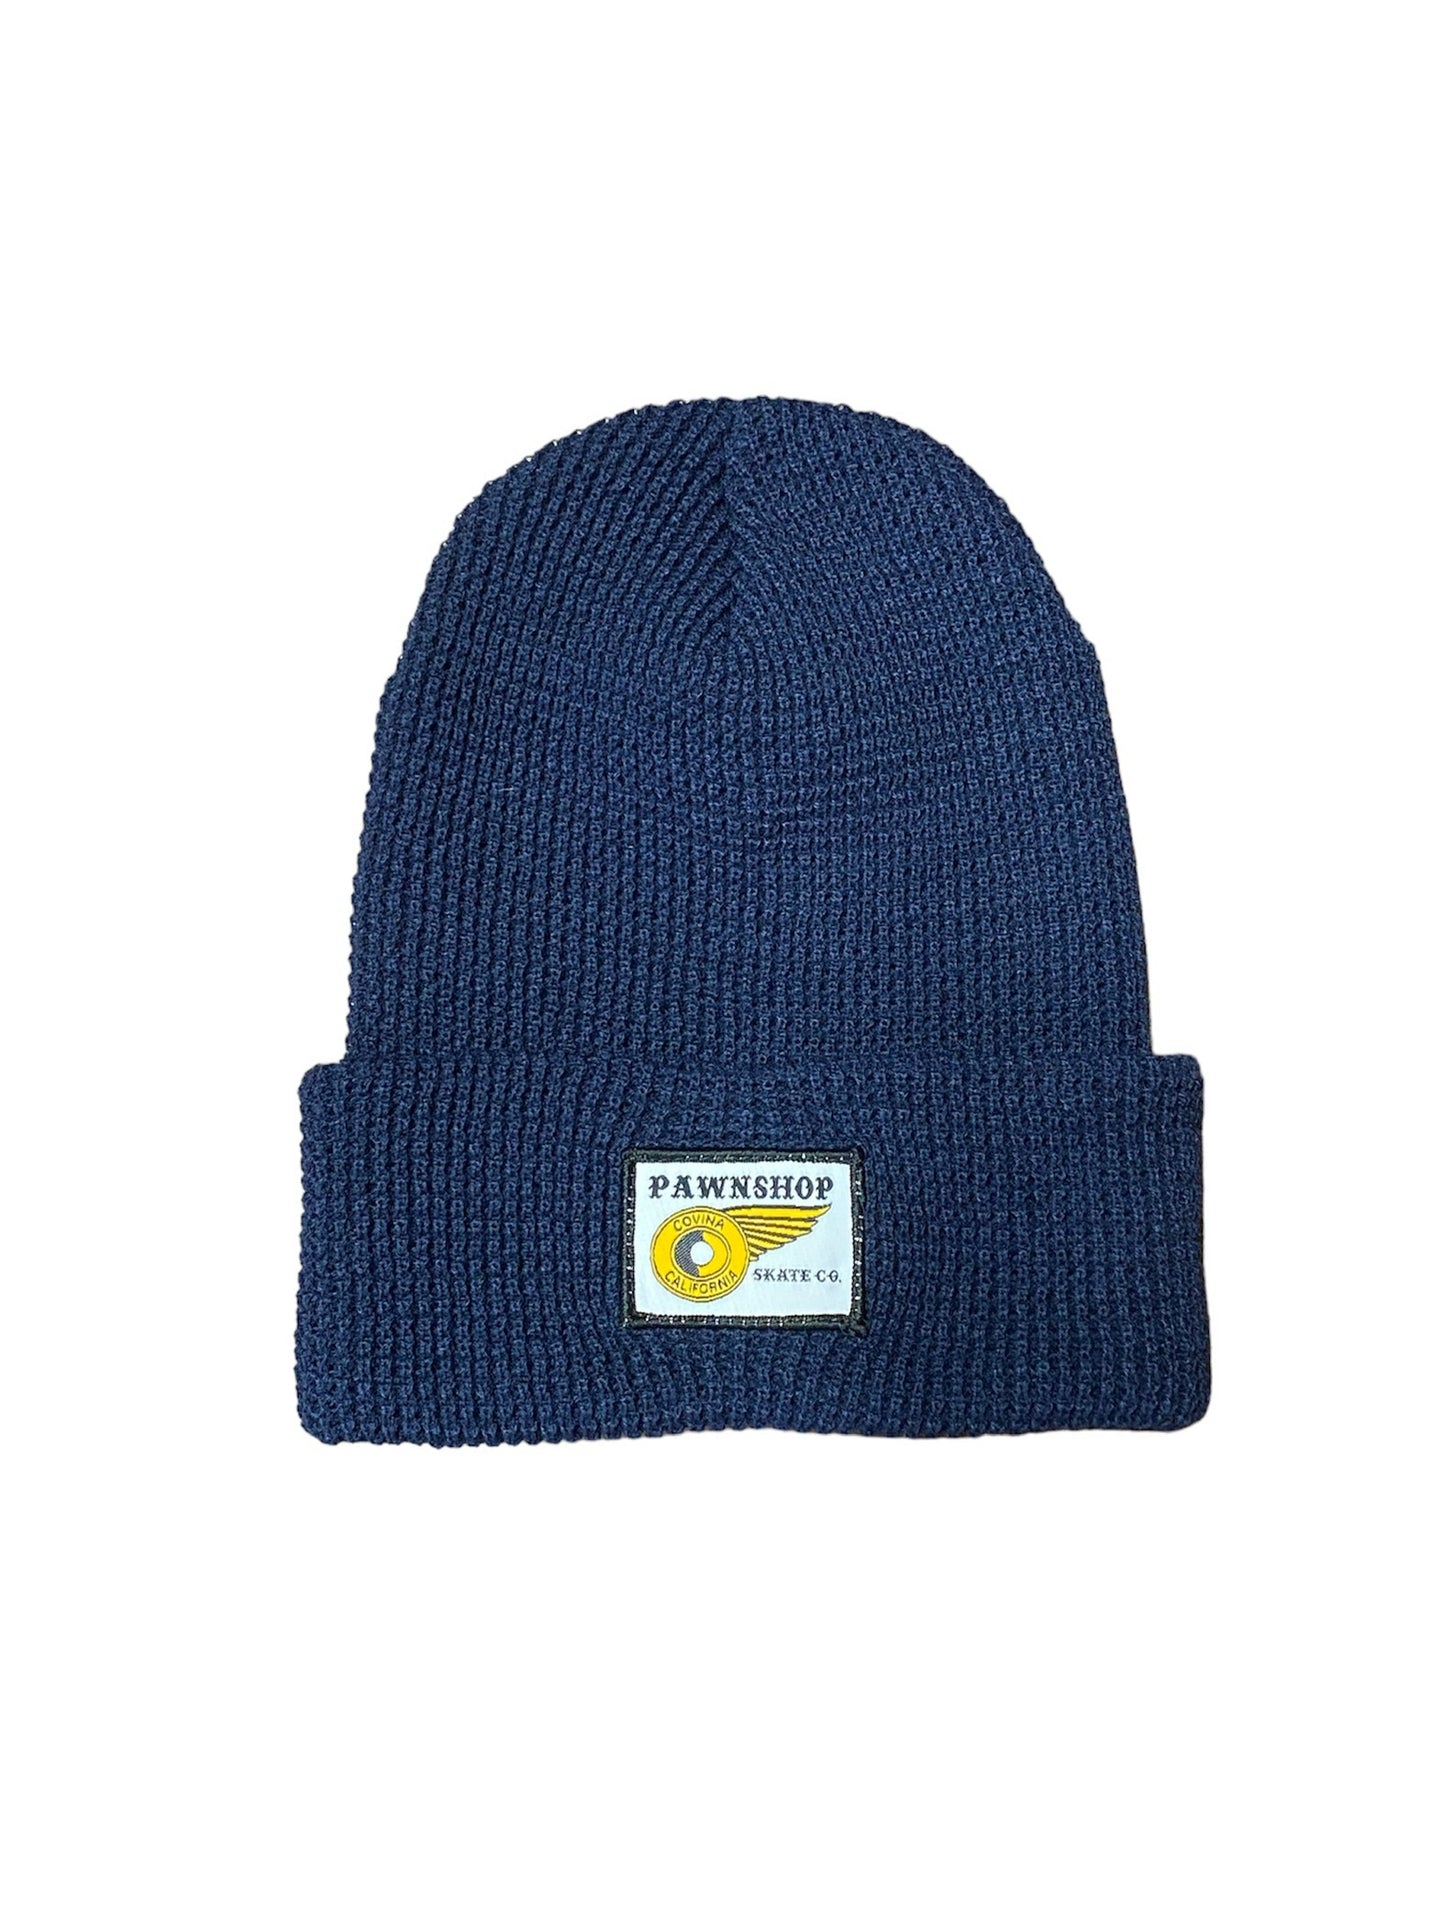 Pawnshop Wing and Wheel Knitted Cuff Beanie